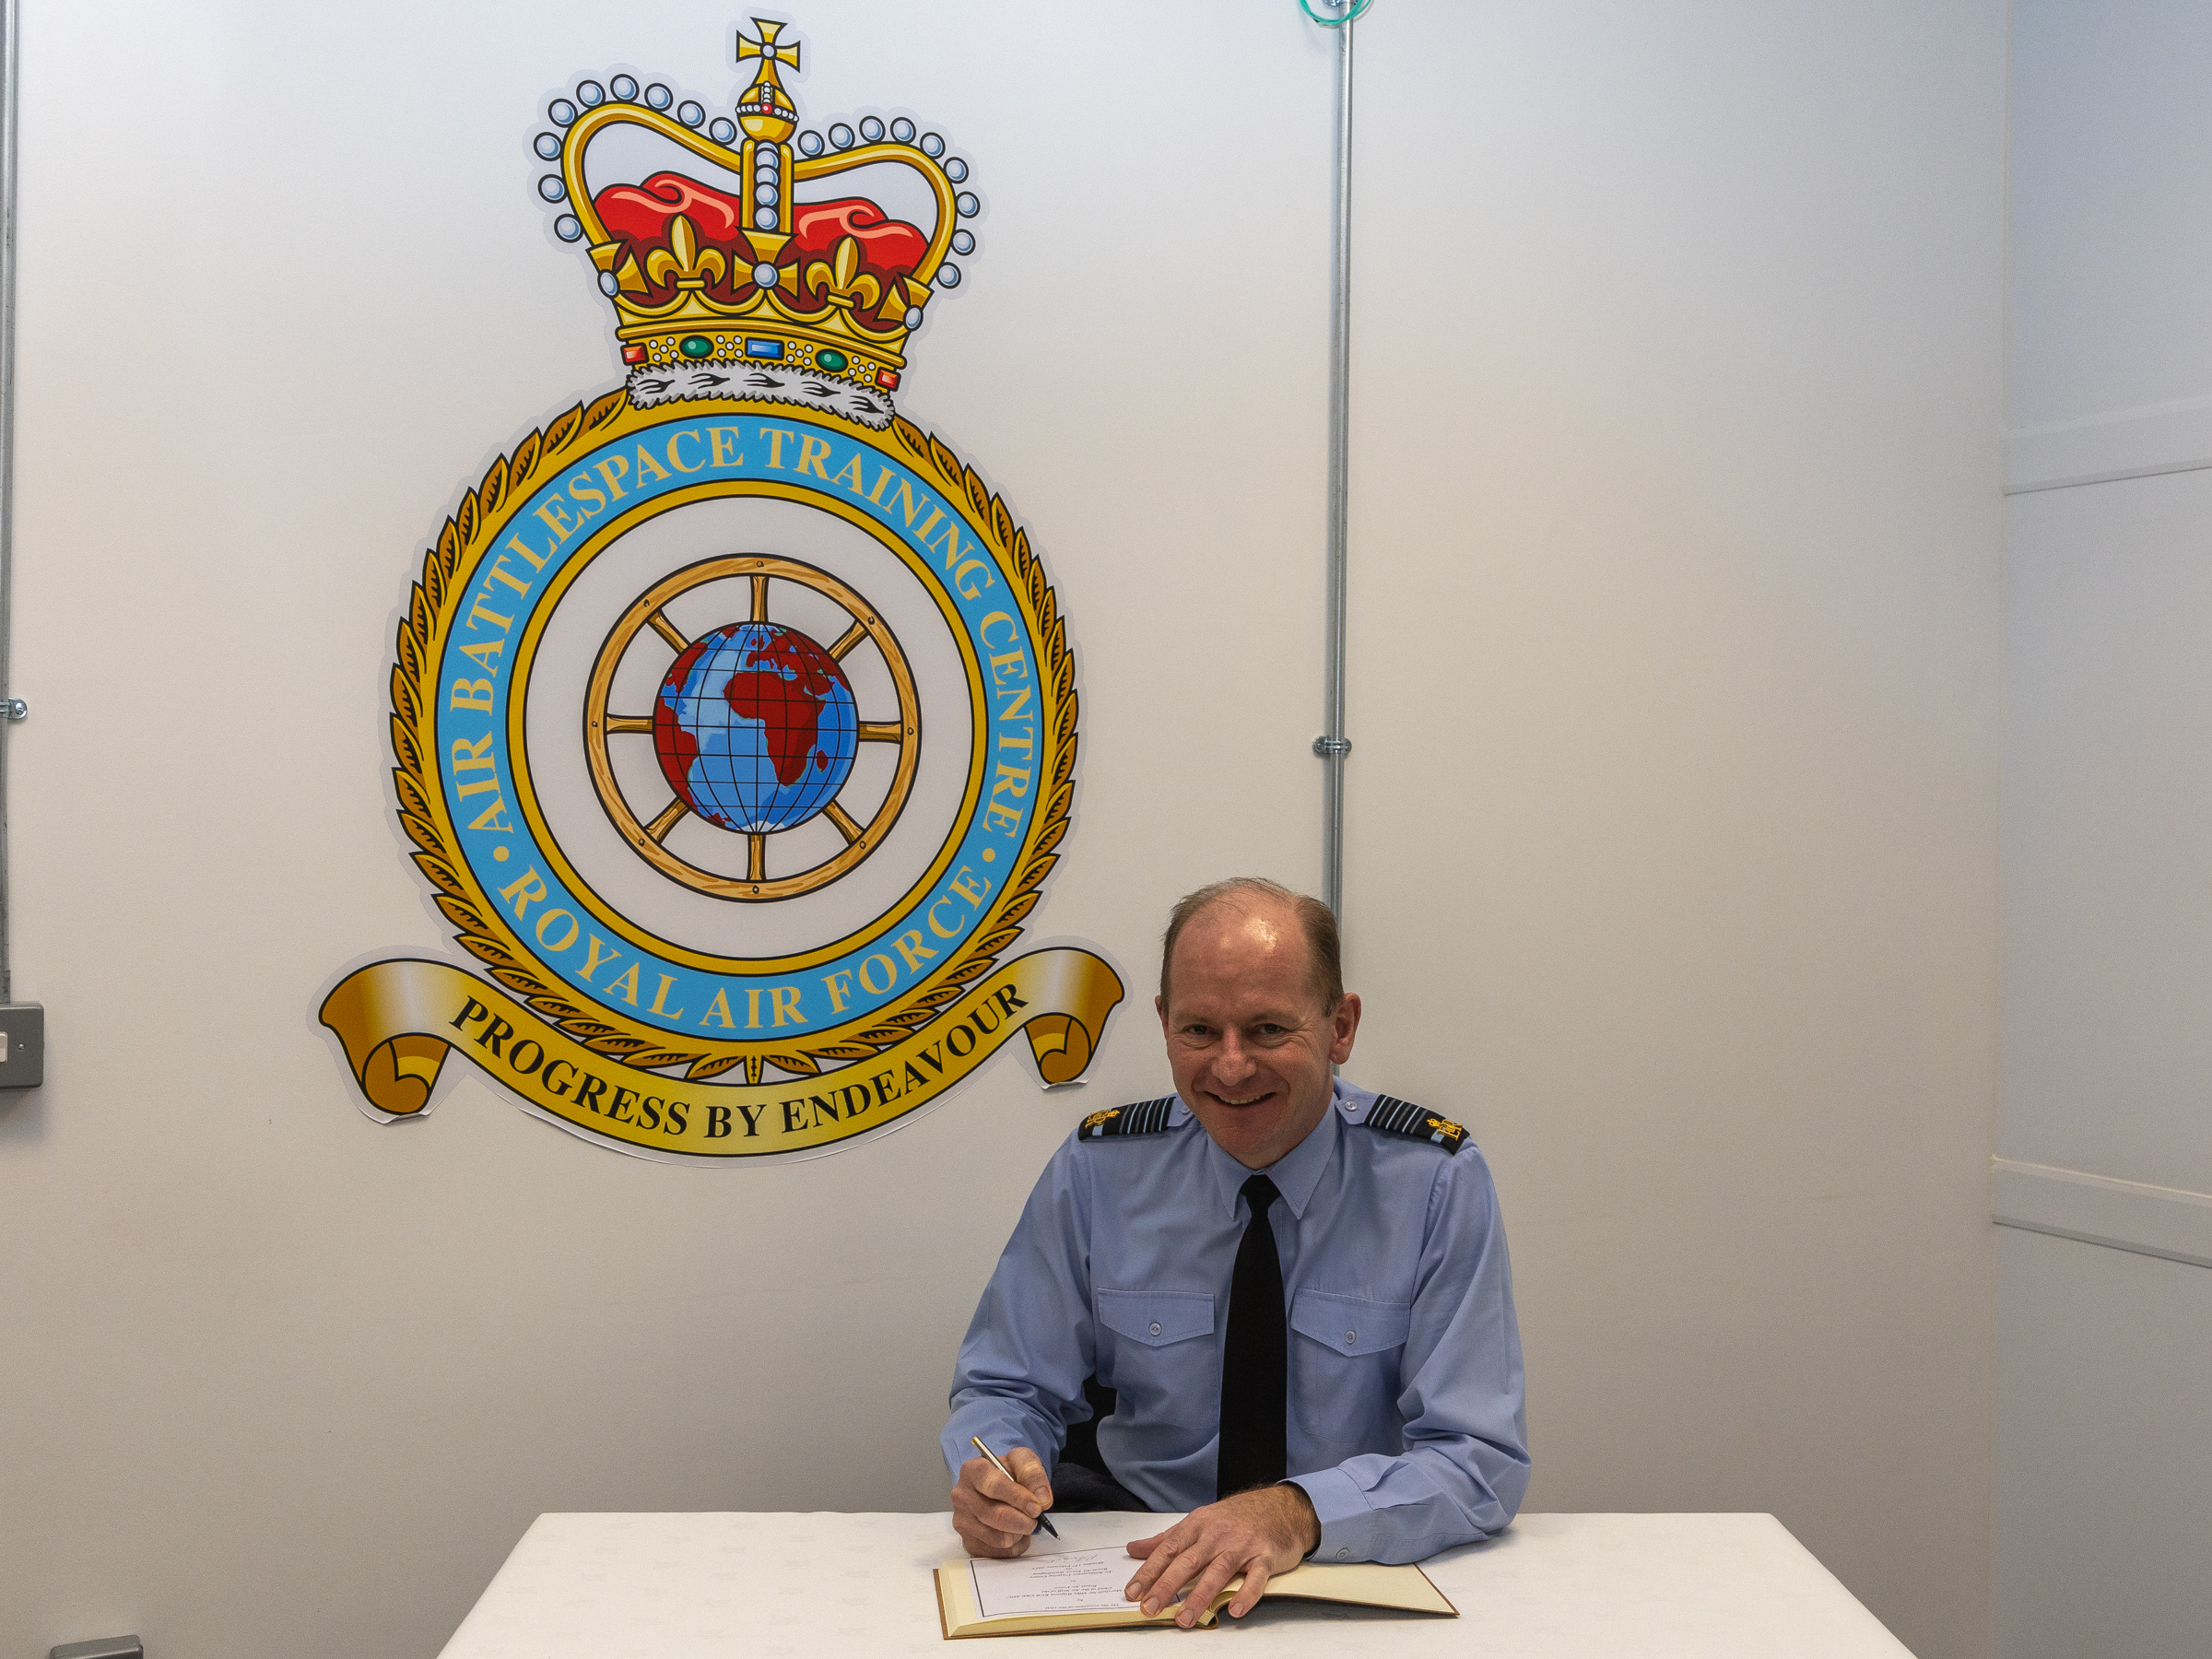 Image show the Chief of the Air Staff sat at a table signing a book, with the Air Battlespace Training Centre badge on the wall.